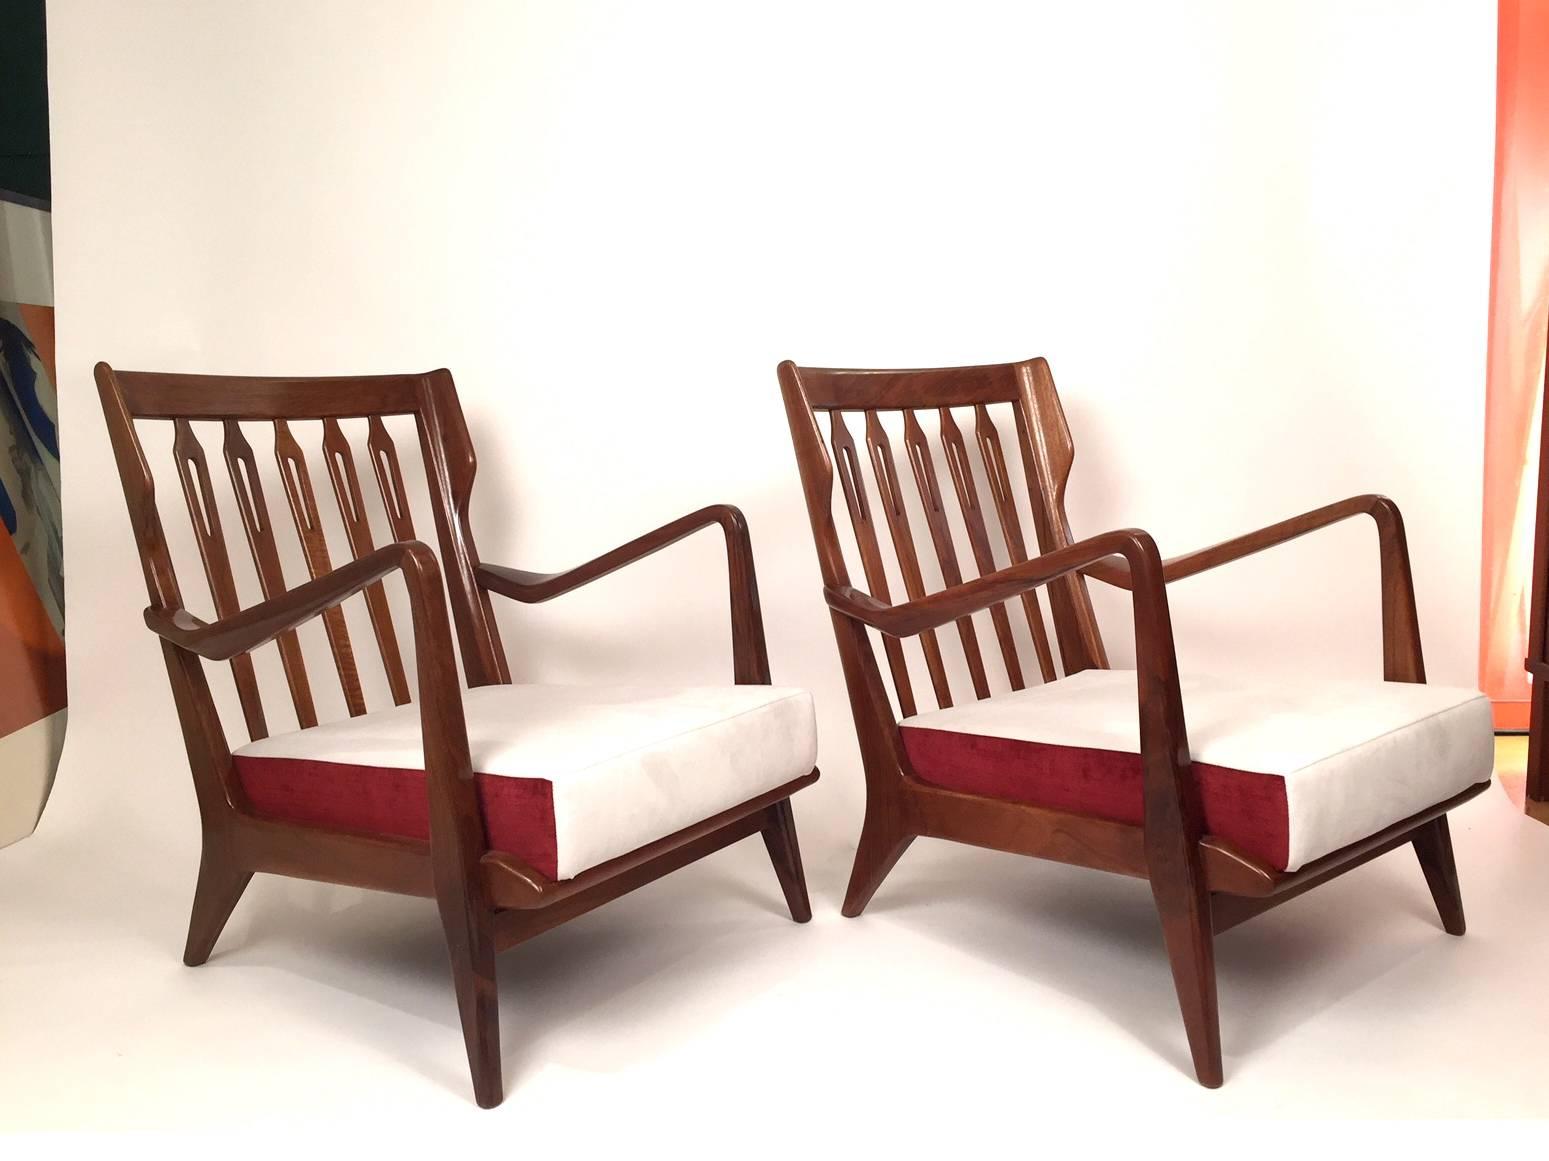 Mid-20th Century Pair of Gio Ponti Walnut Chairs Model No 516 for Cassina, 1950s